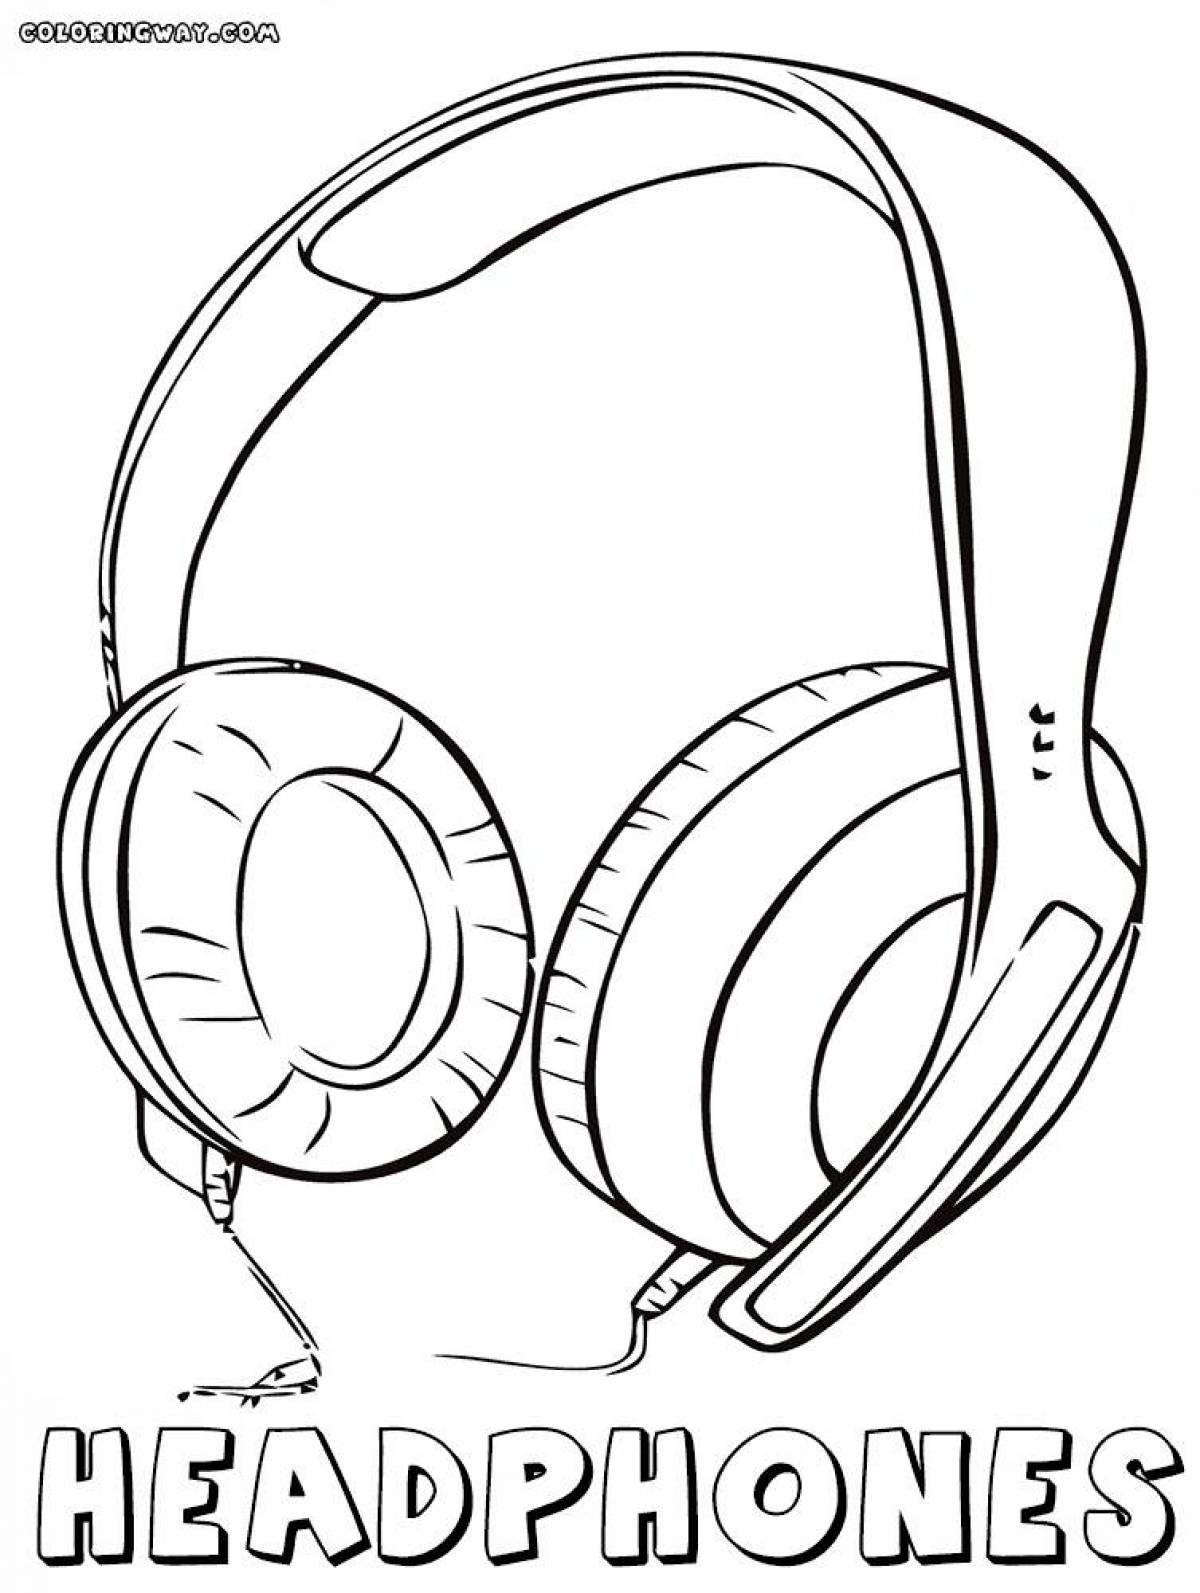 Colorful headphone coloring page